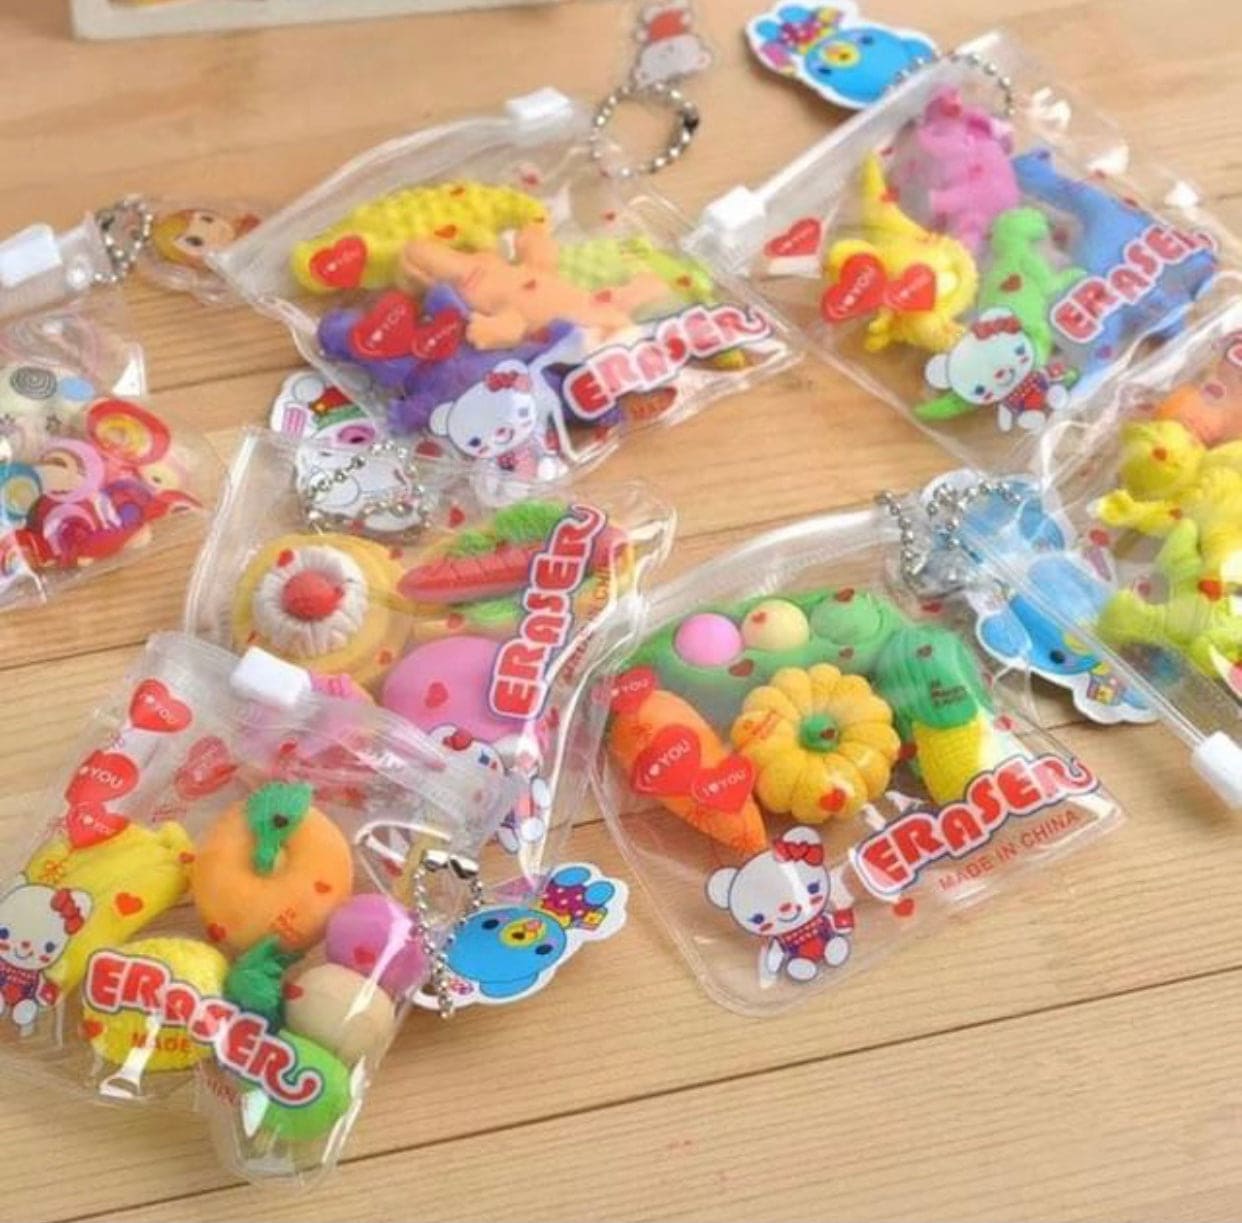 Set Of 4 Erasers Pencil Rubber Stationery Bag, Creative School ag Animal Fruit Cake Rubber, Cartoon Cute School Rubber, Lovely Cartoon Animal Sports Themed Mini Erasers